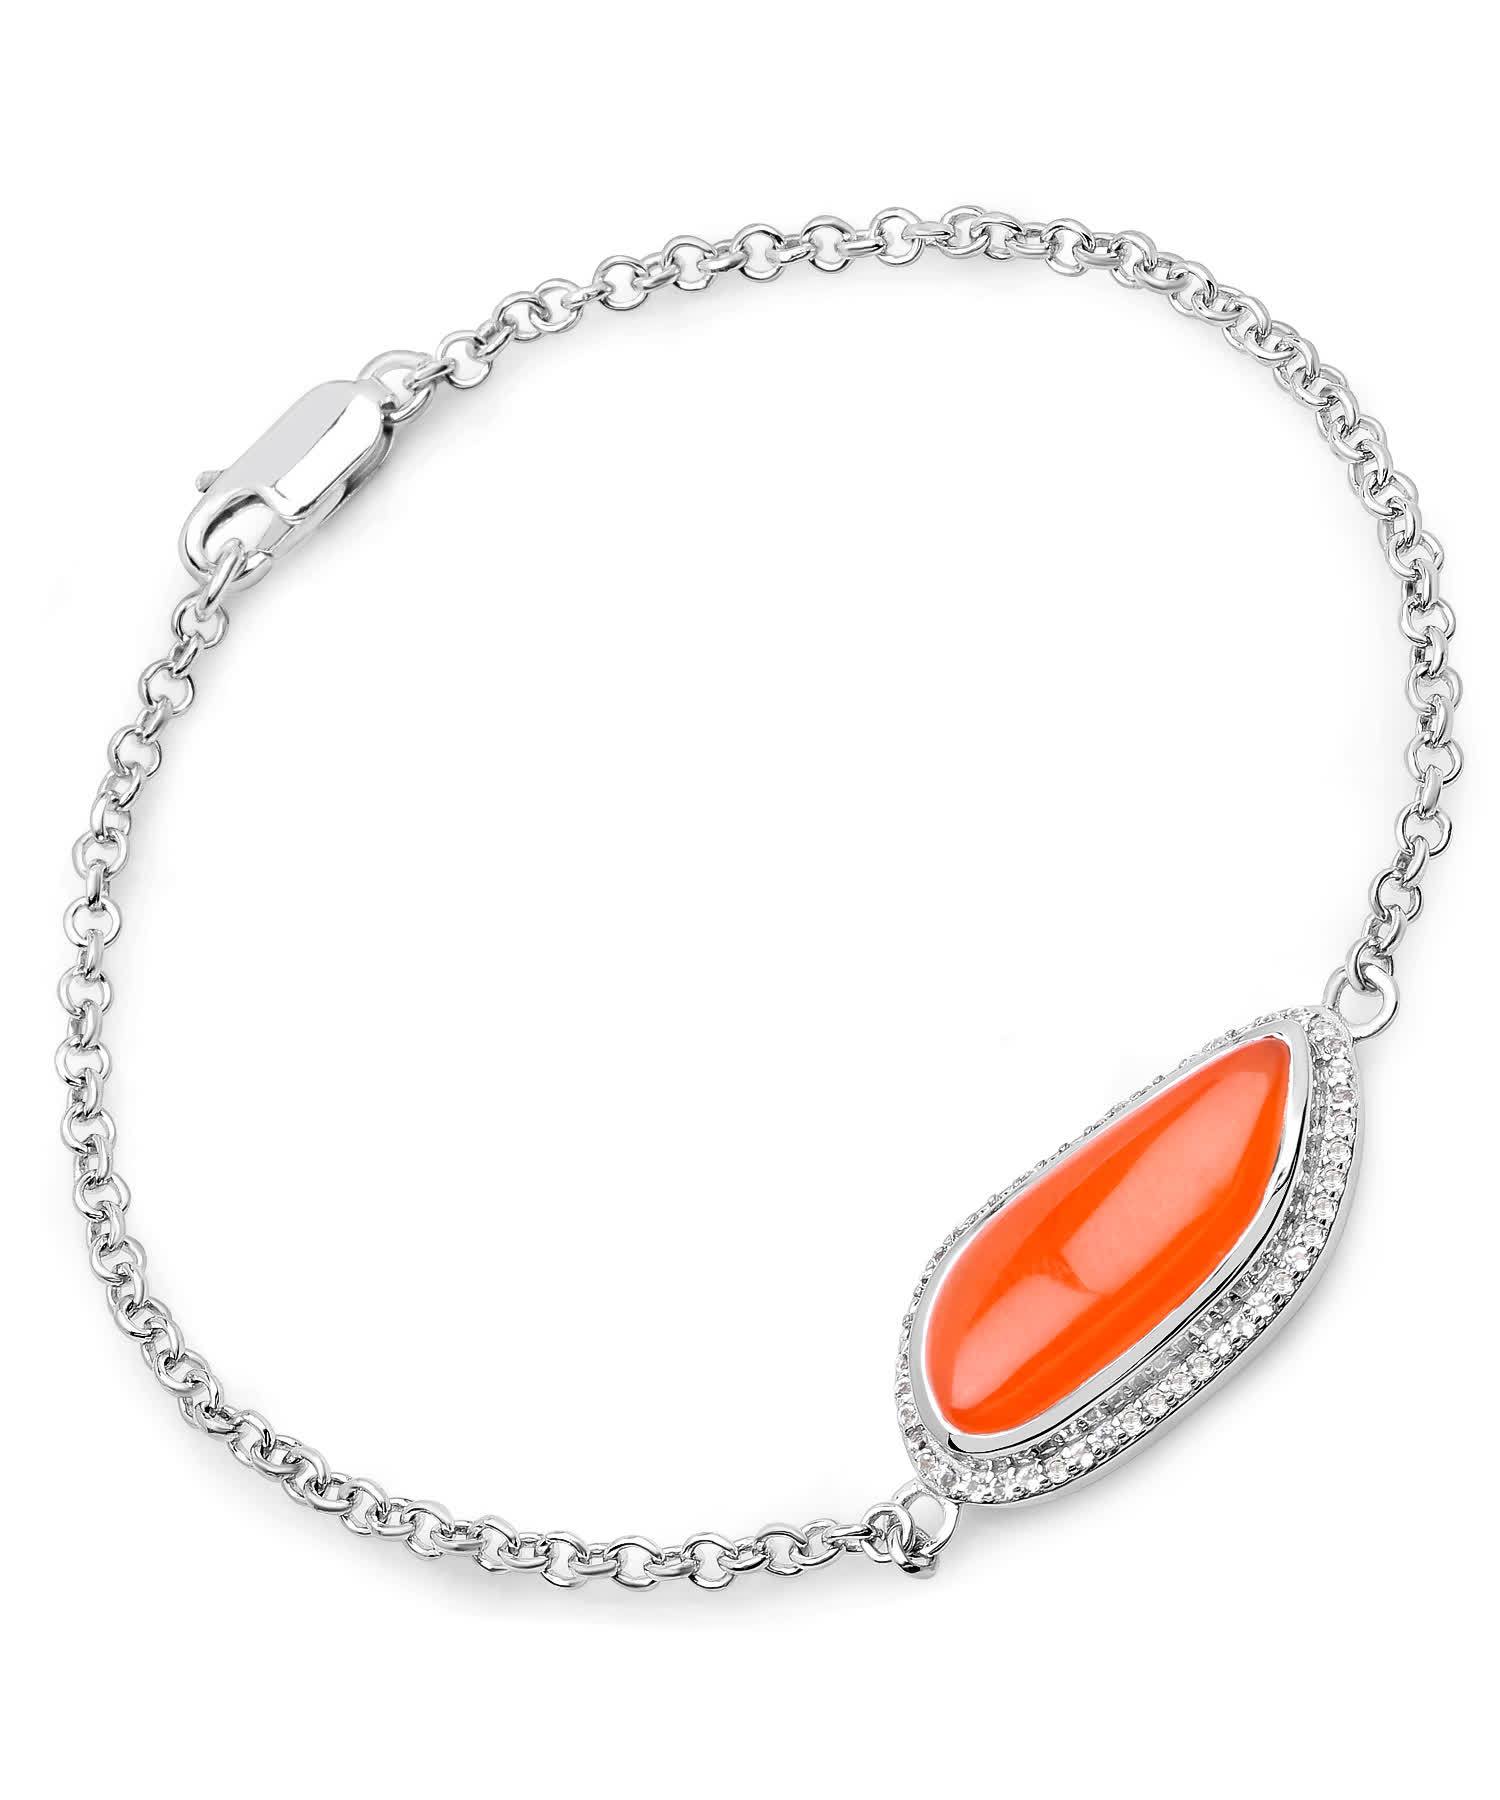 5.28ctw Natural Carnelian Rhodium Plated 925 Sterling Silver Link Bracelet View 1